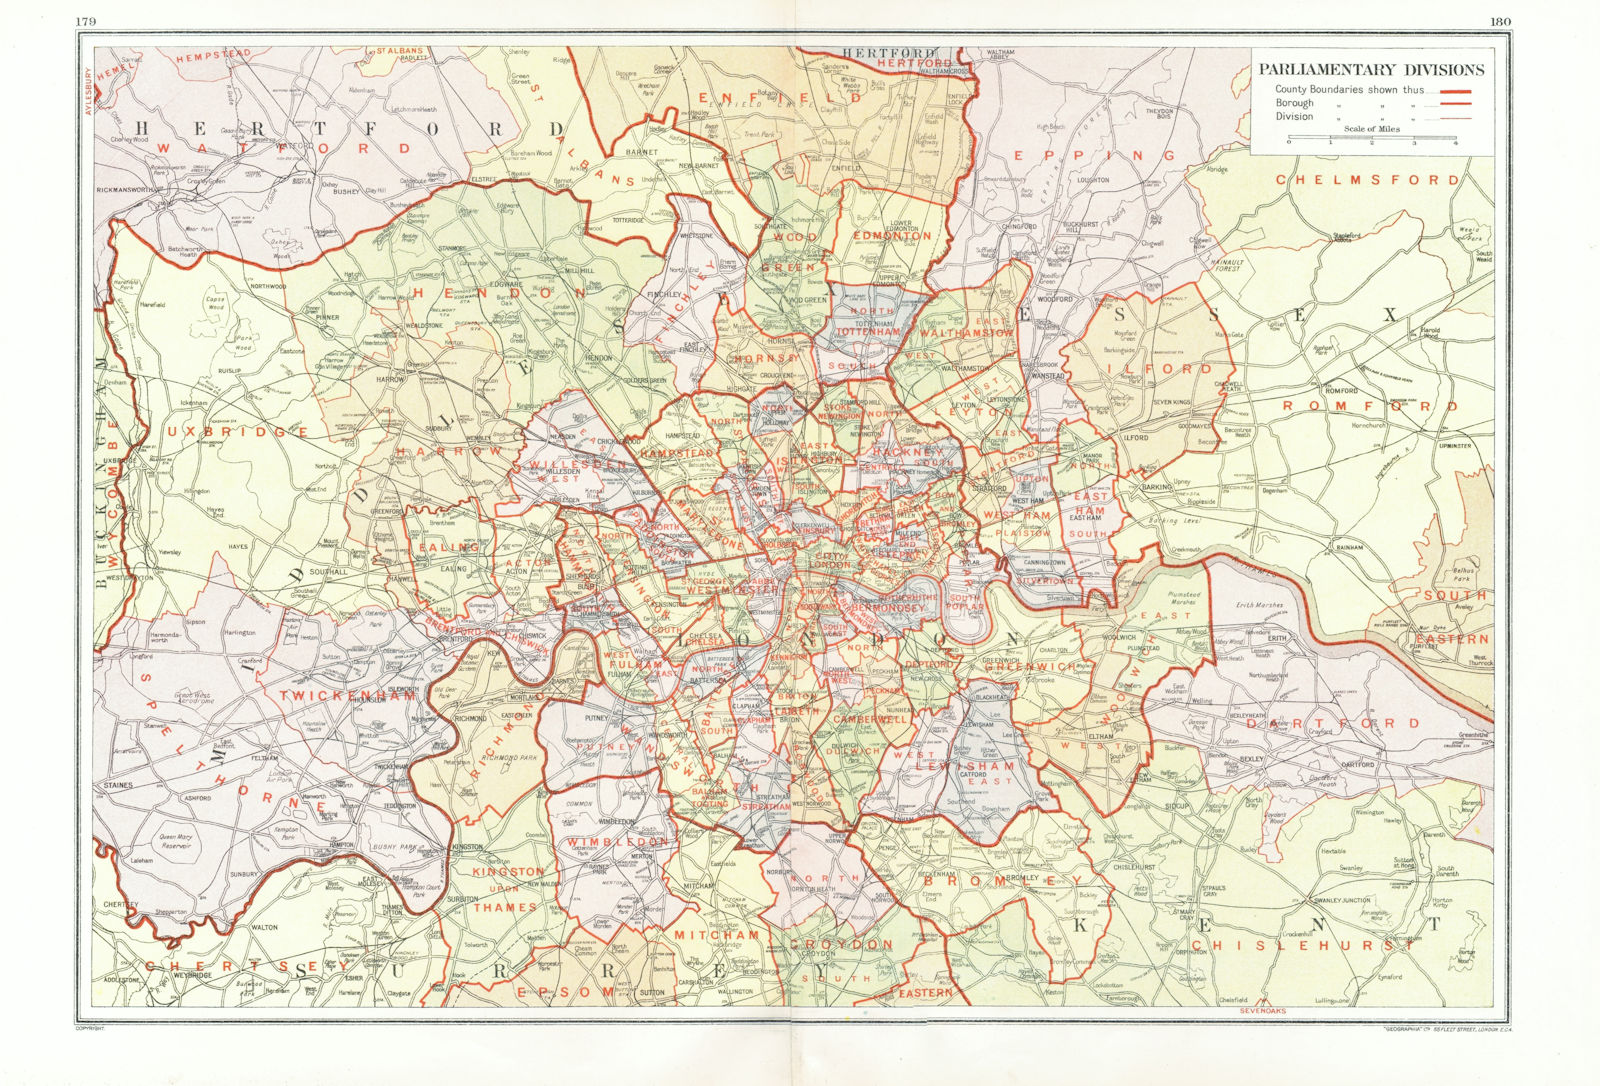 LONDON. Parliamentary Divisions Constituencies Seats Boroughs 1933 old map